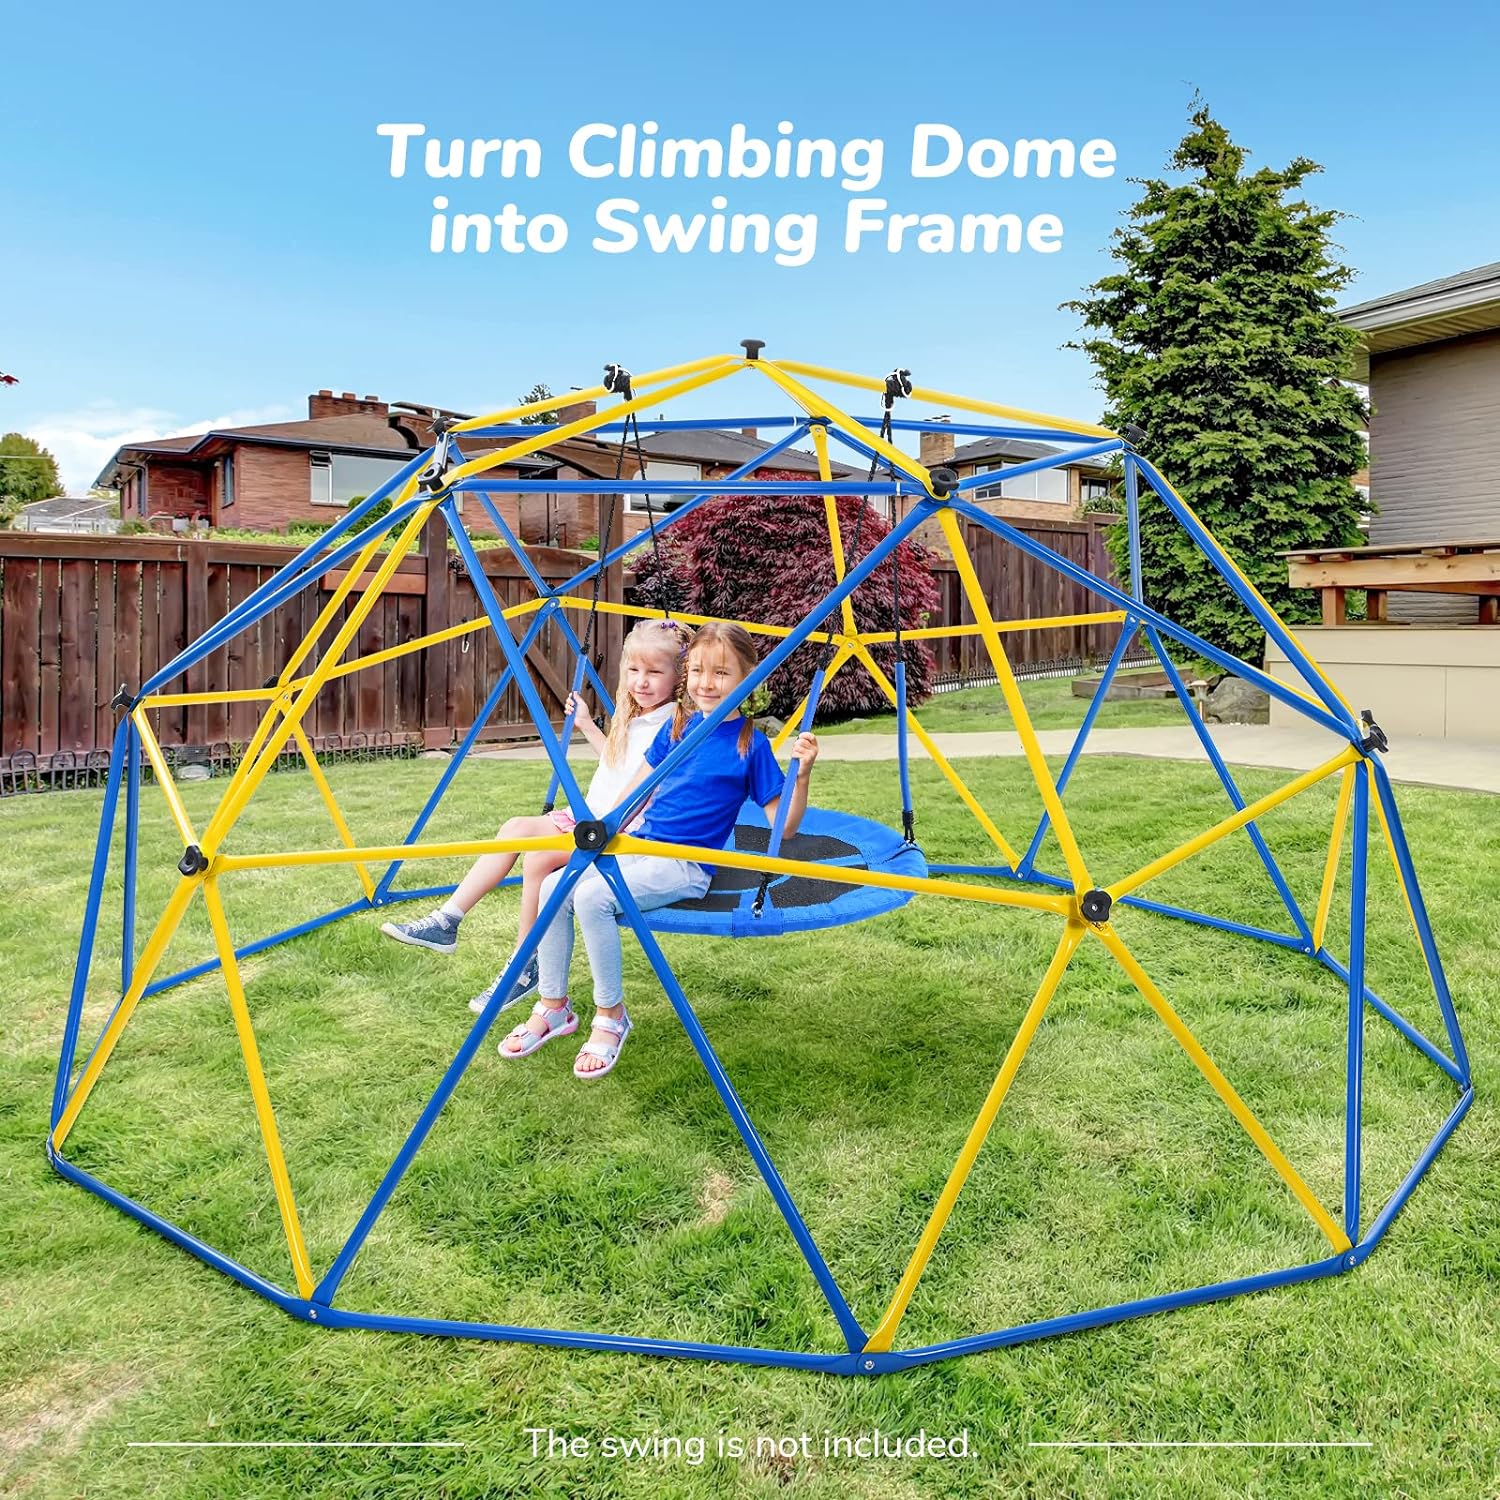 【Pre-Sale】Upgraded 10FT Climbing Dome with Canopy and Swing, Dome Climber for Kids 3 - 10, Weight Capability 800LBS, Rust and UV Resistant Steel